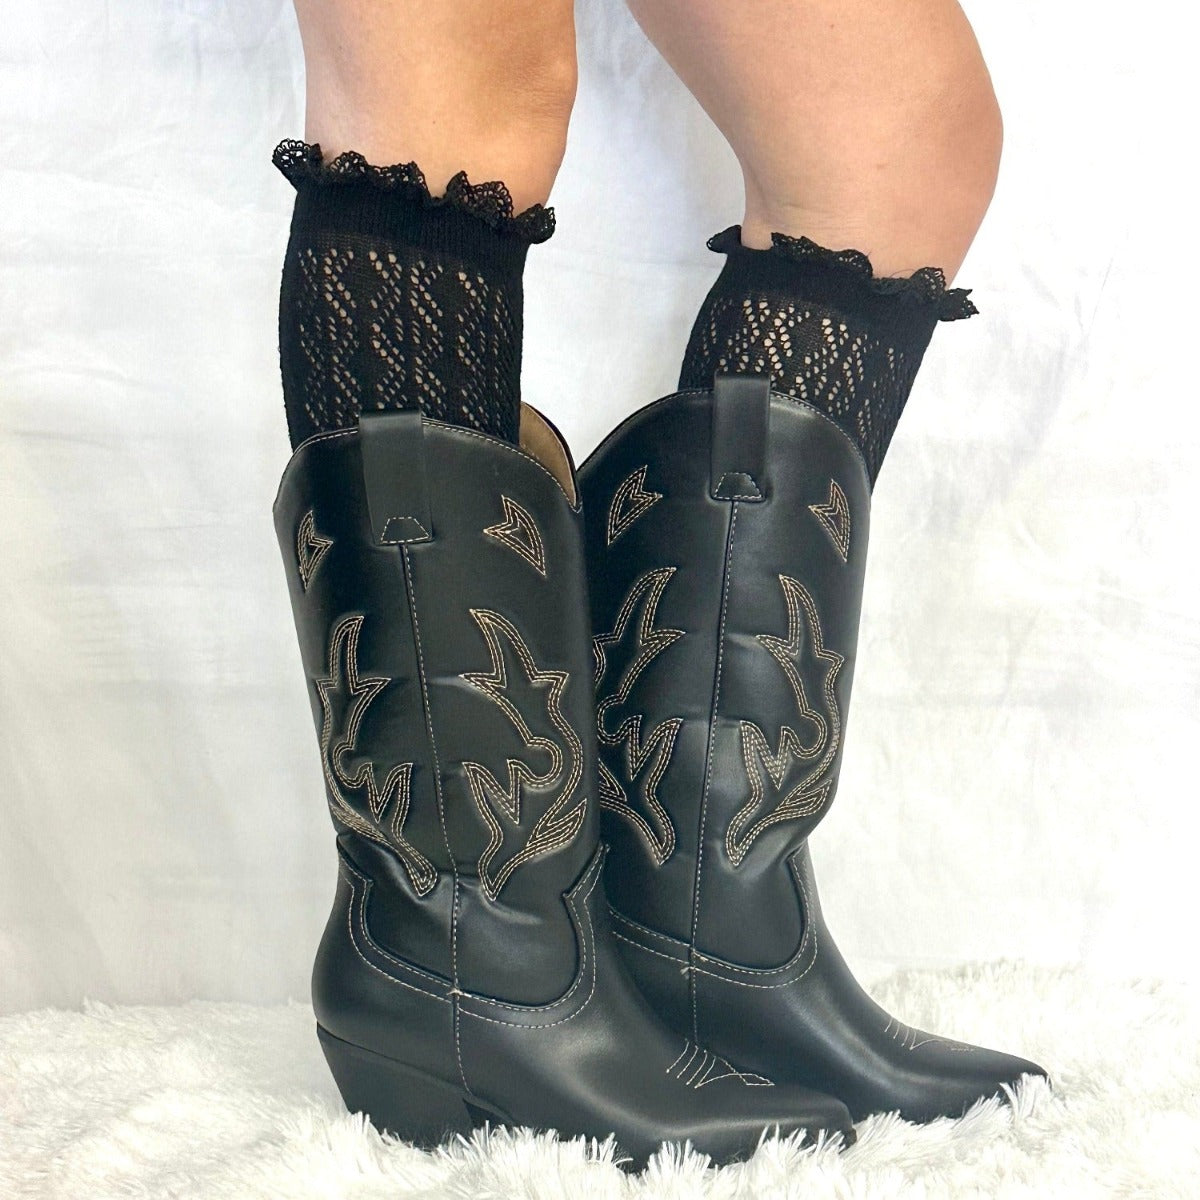 cute socks for cowgirl boots what to wear - Catherine Cole Atelier, best quality knee high tsll socks women's